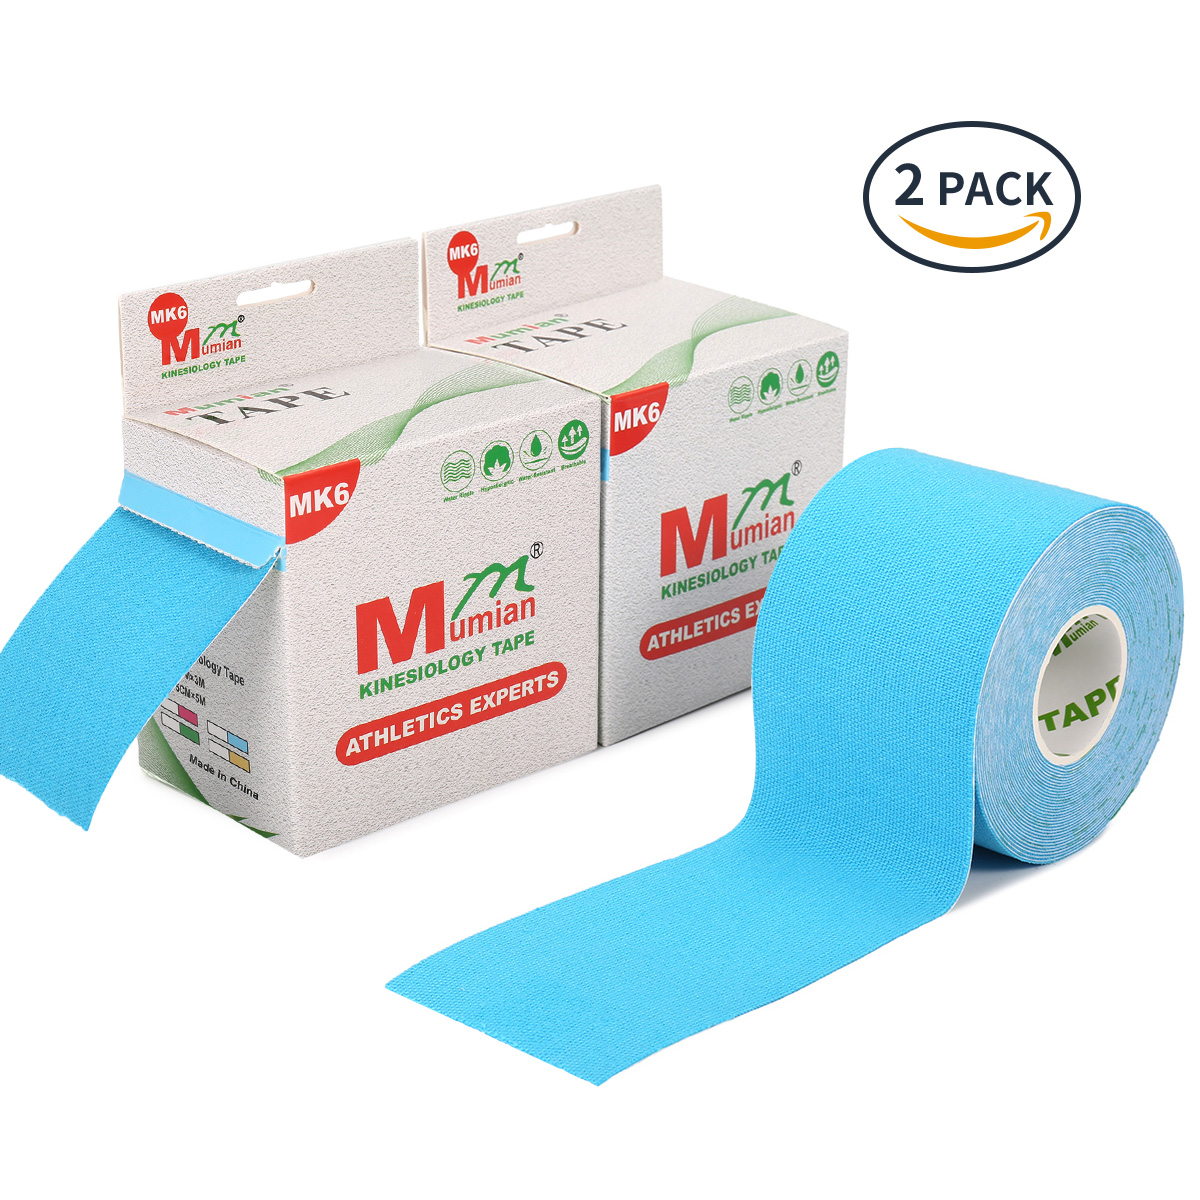 Uncut-Muscle-Support-Tape-2-Roll-of-Elastic-Muscle-Support-Tape-Waterproof-Sports-Strapping-Tape-For-1474487-1